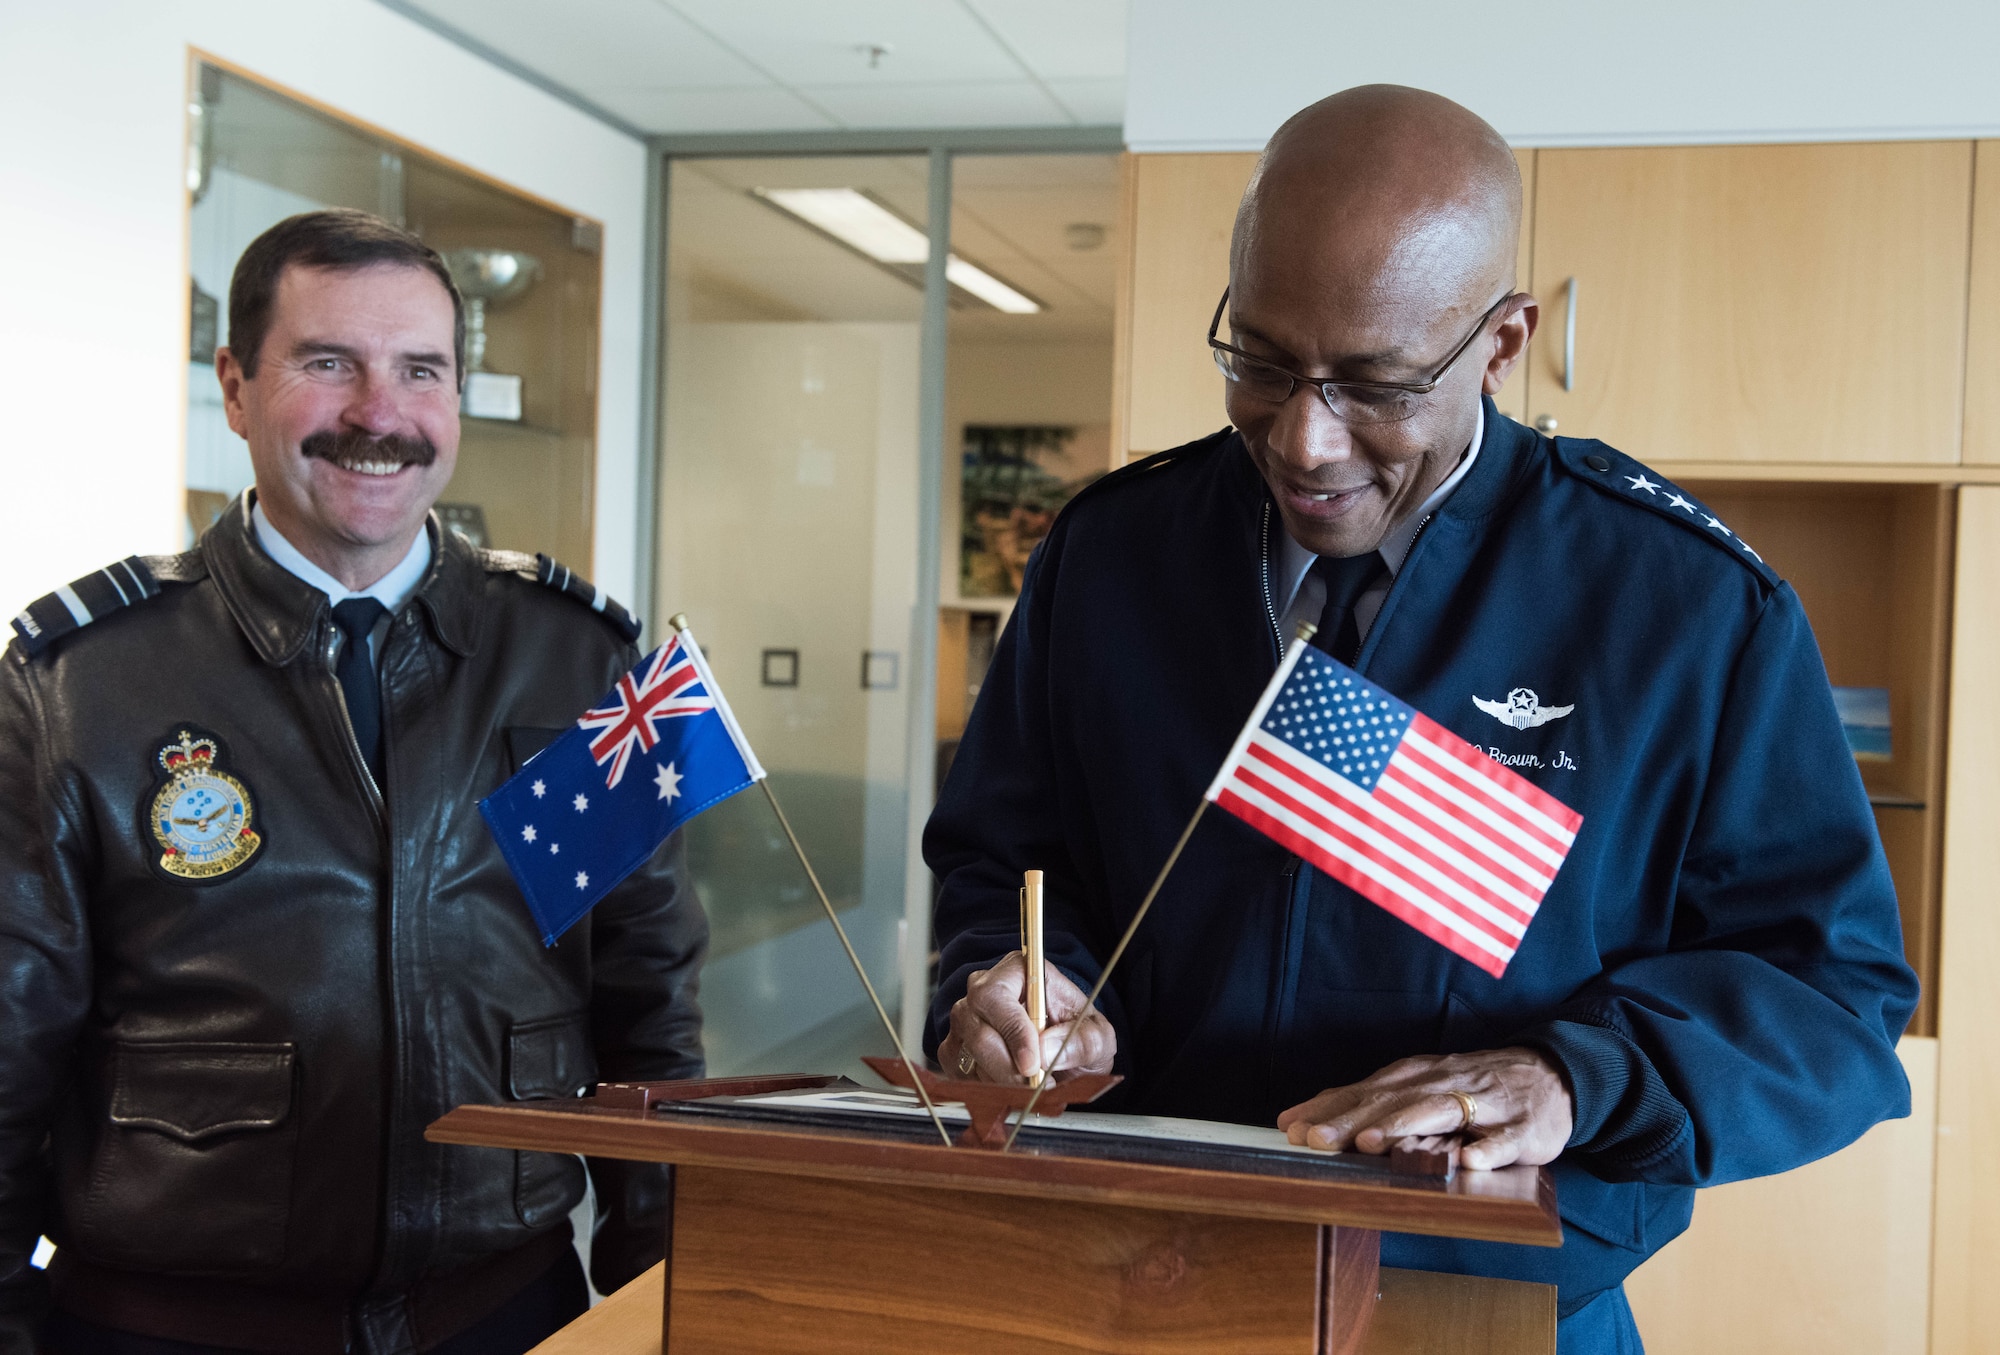 Gen. CQ Brown, Jr., Pacific Air Forces commander, signs a guest book before an office call with Air Marshal Leo Davies (left), Royal Australian Air Force (RAAF) chief of Air Force, at the Russell offices, Canberra, Australia, Aug. 10, 2018. His first trip to the region since taking command on July 26, 2018, Brown met with key defense and military leaders in Canberra and RAAF Bases Williamtown, Tindal and Darwin to see first-hand the strength of the U.S.-Australia alliance and discuss opportunities to ensure a free and open Indo-Pacific region. (U.S. Air Force photo by Staff Sgt. Hailey Haux)